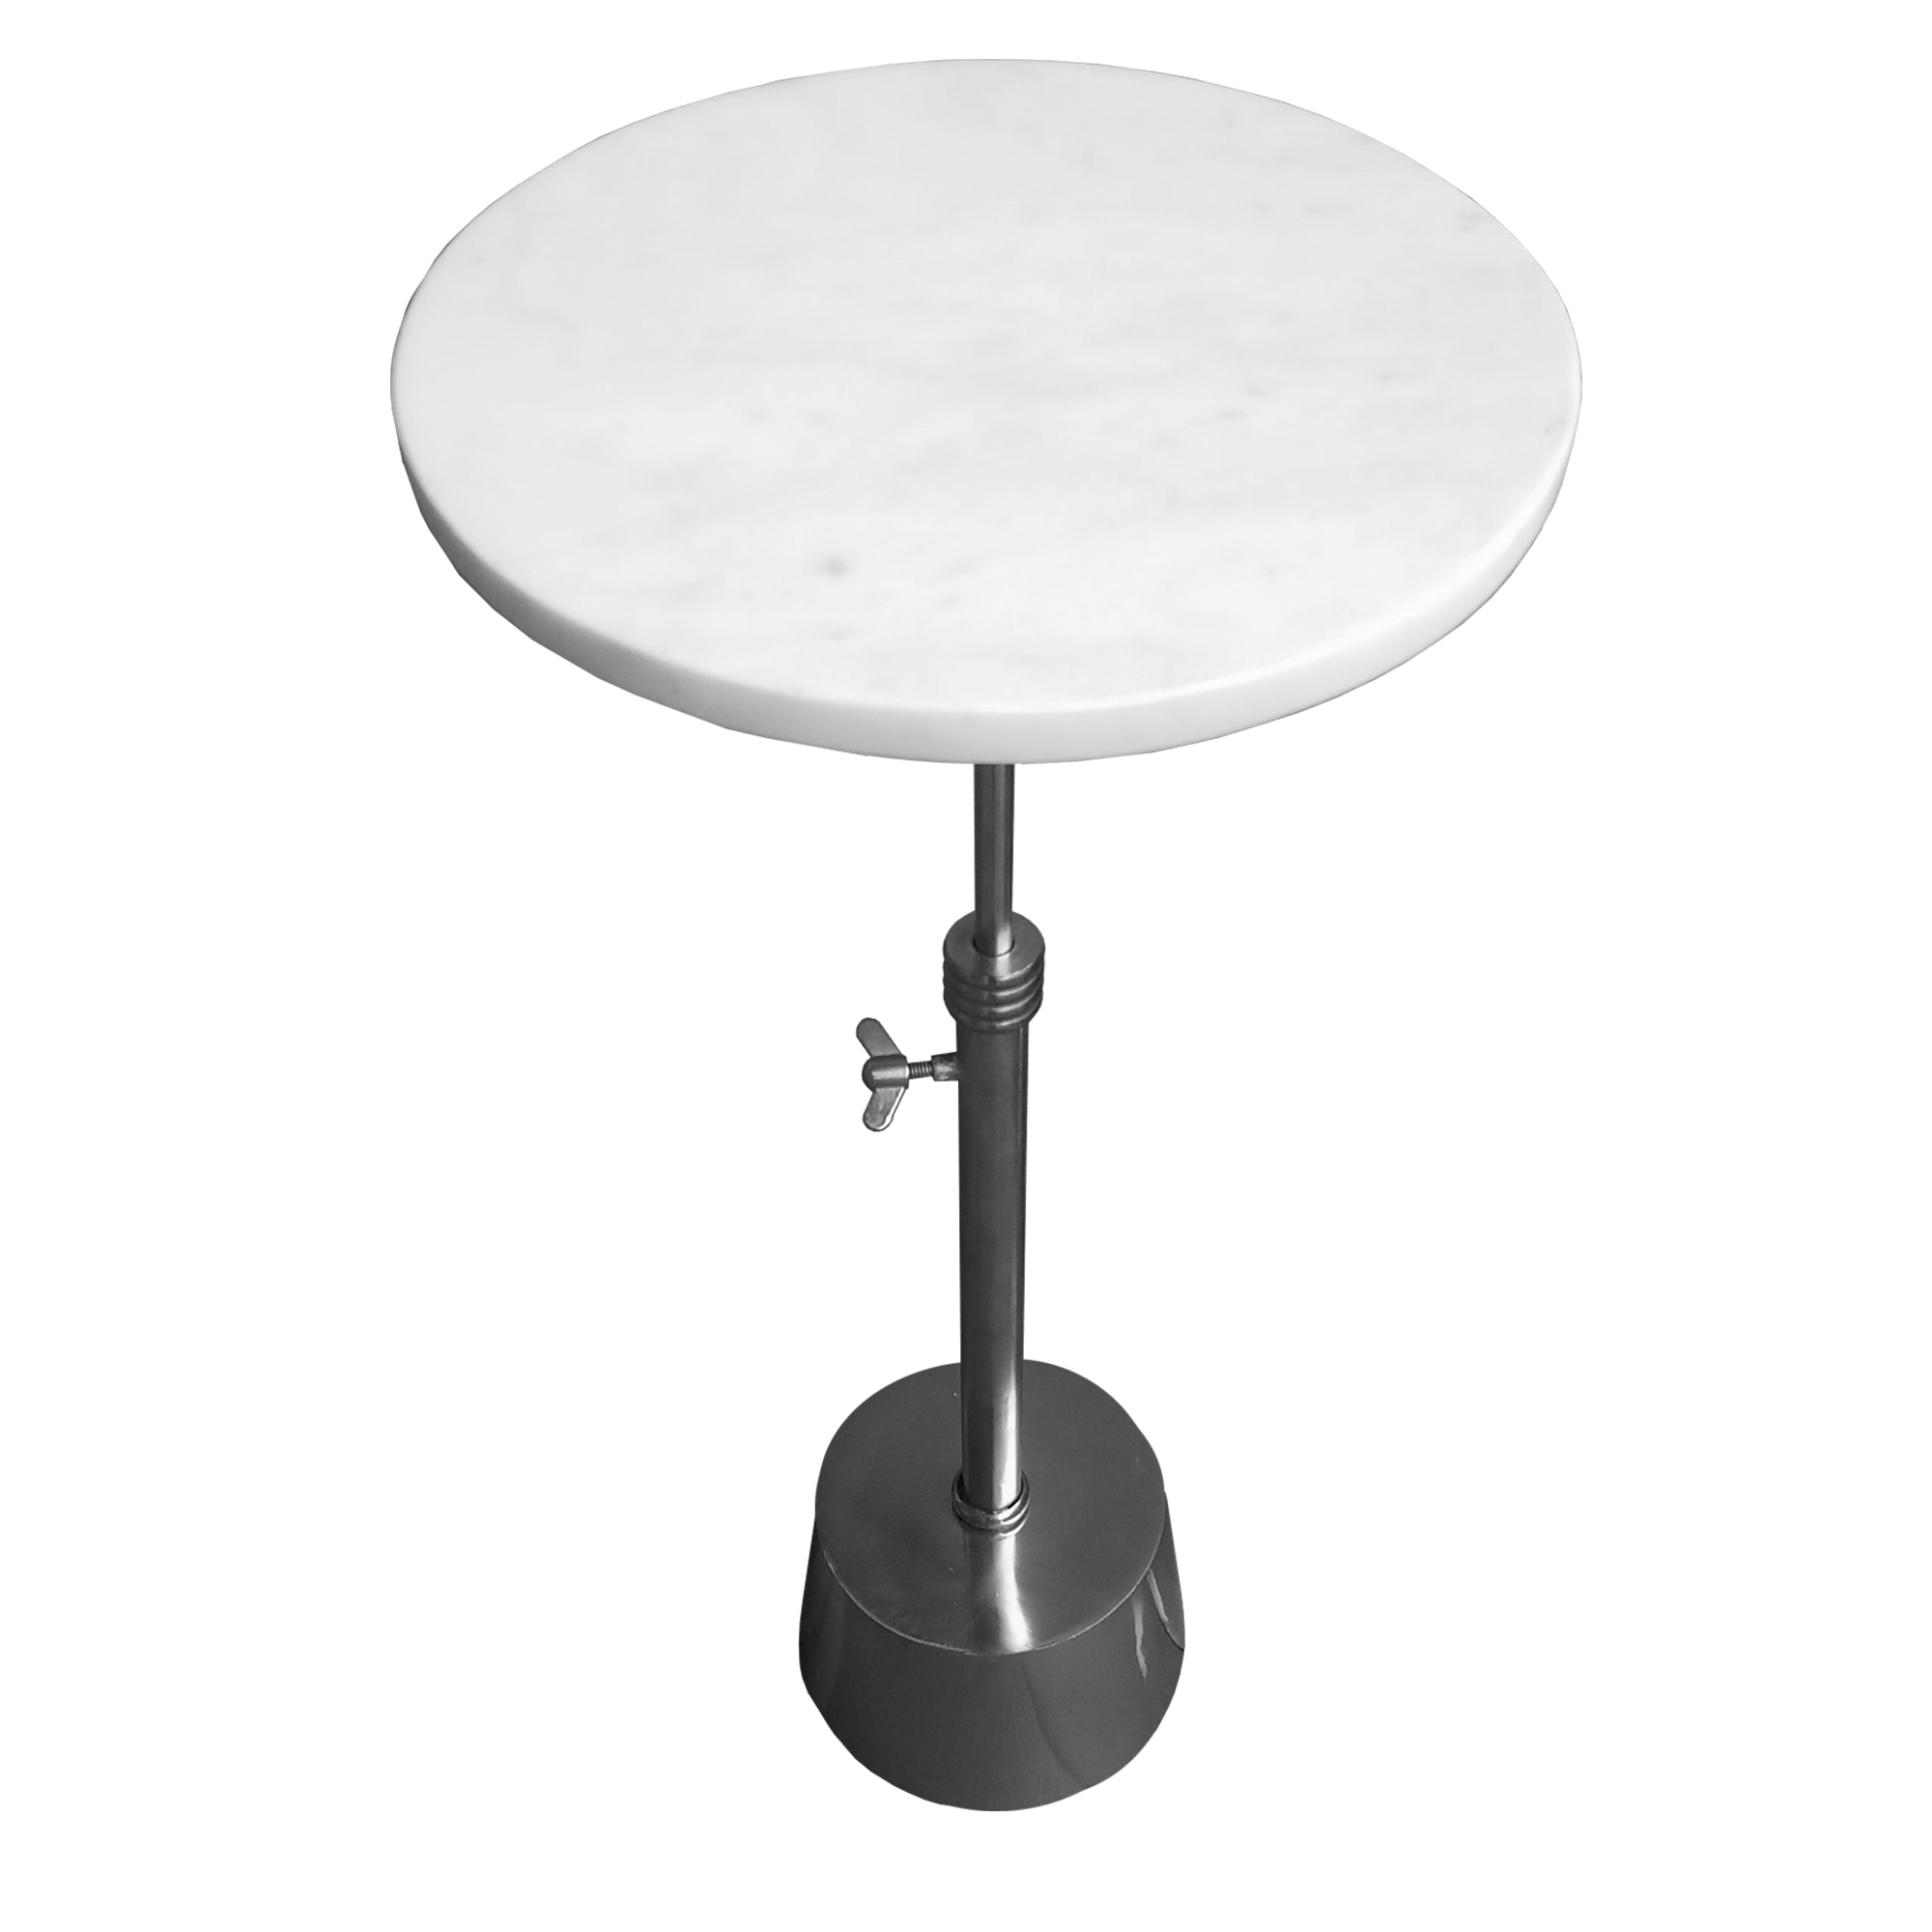 Aluminum Frame Round Side Table With Marble Top And Adjustable Height, White And Silver- Saltoro Sherpi